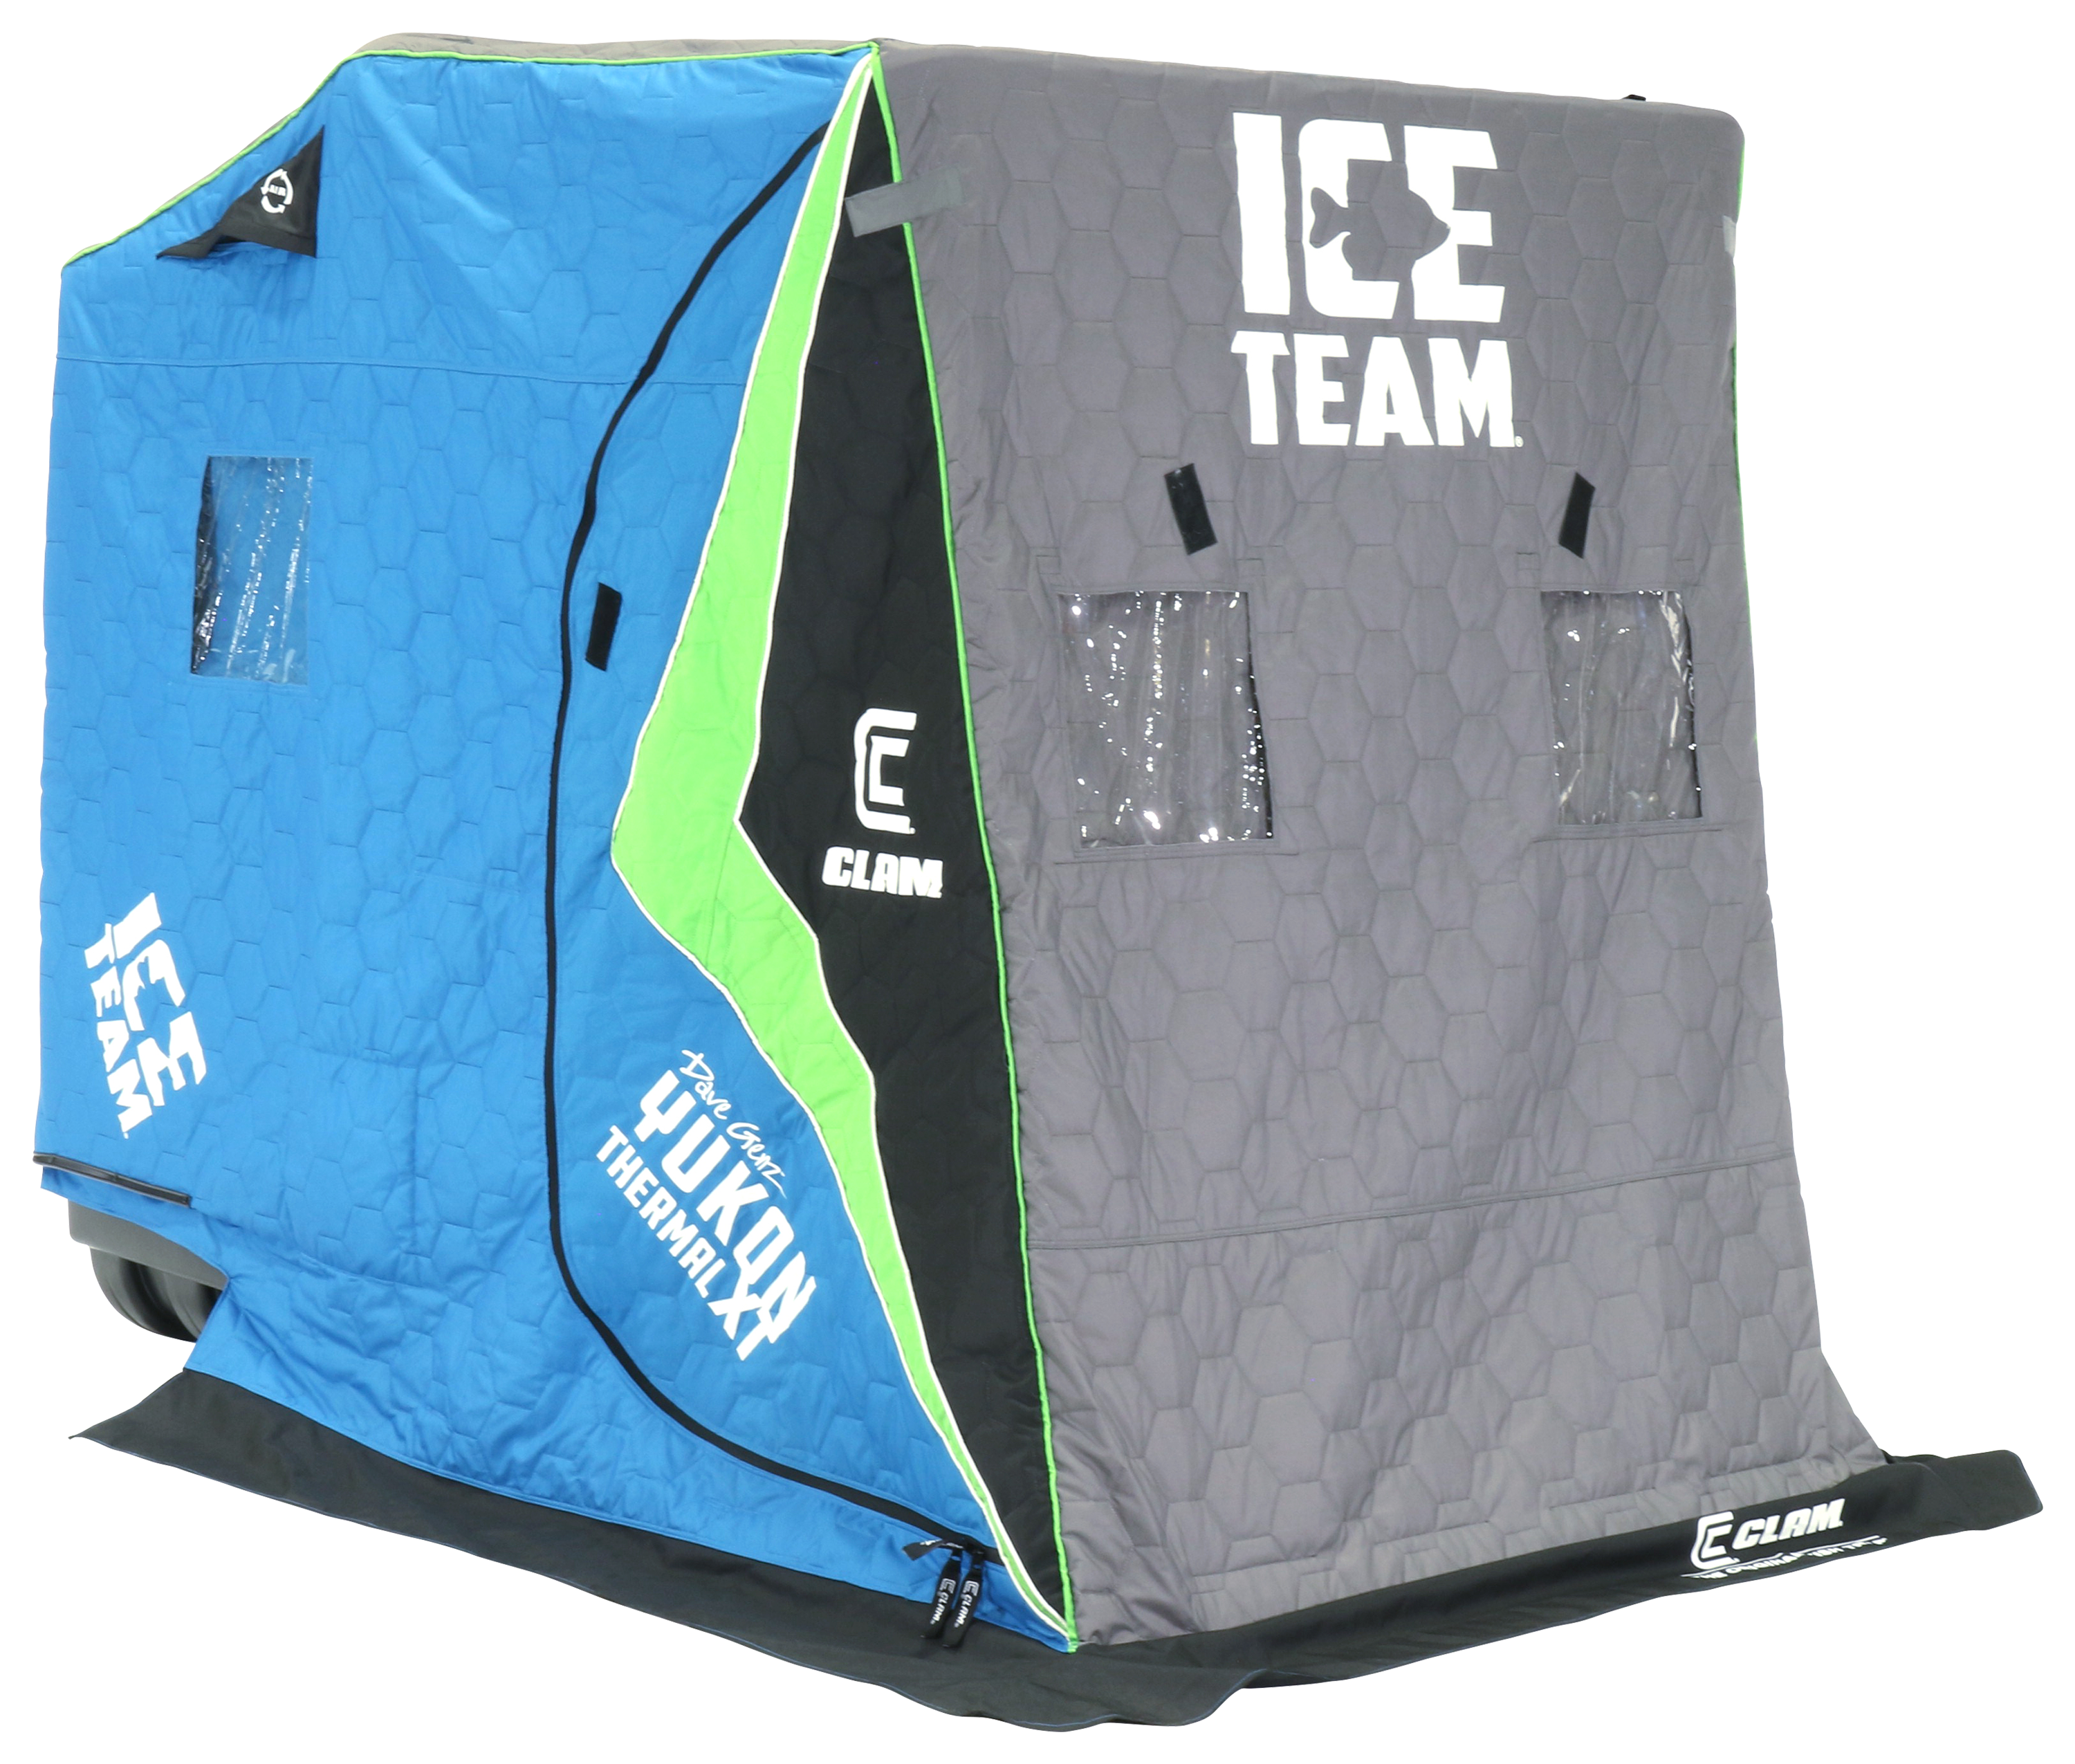 New Clam Ice Fish Tent Shelter Removable Voyager/Thermal Floor W/Carry Bag,  Gray